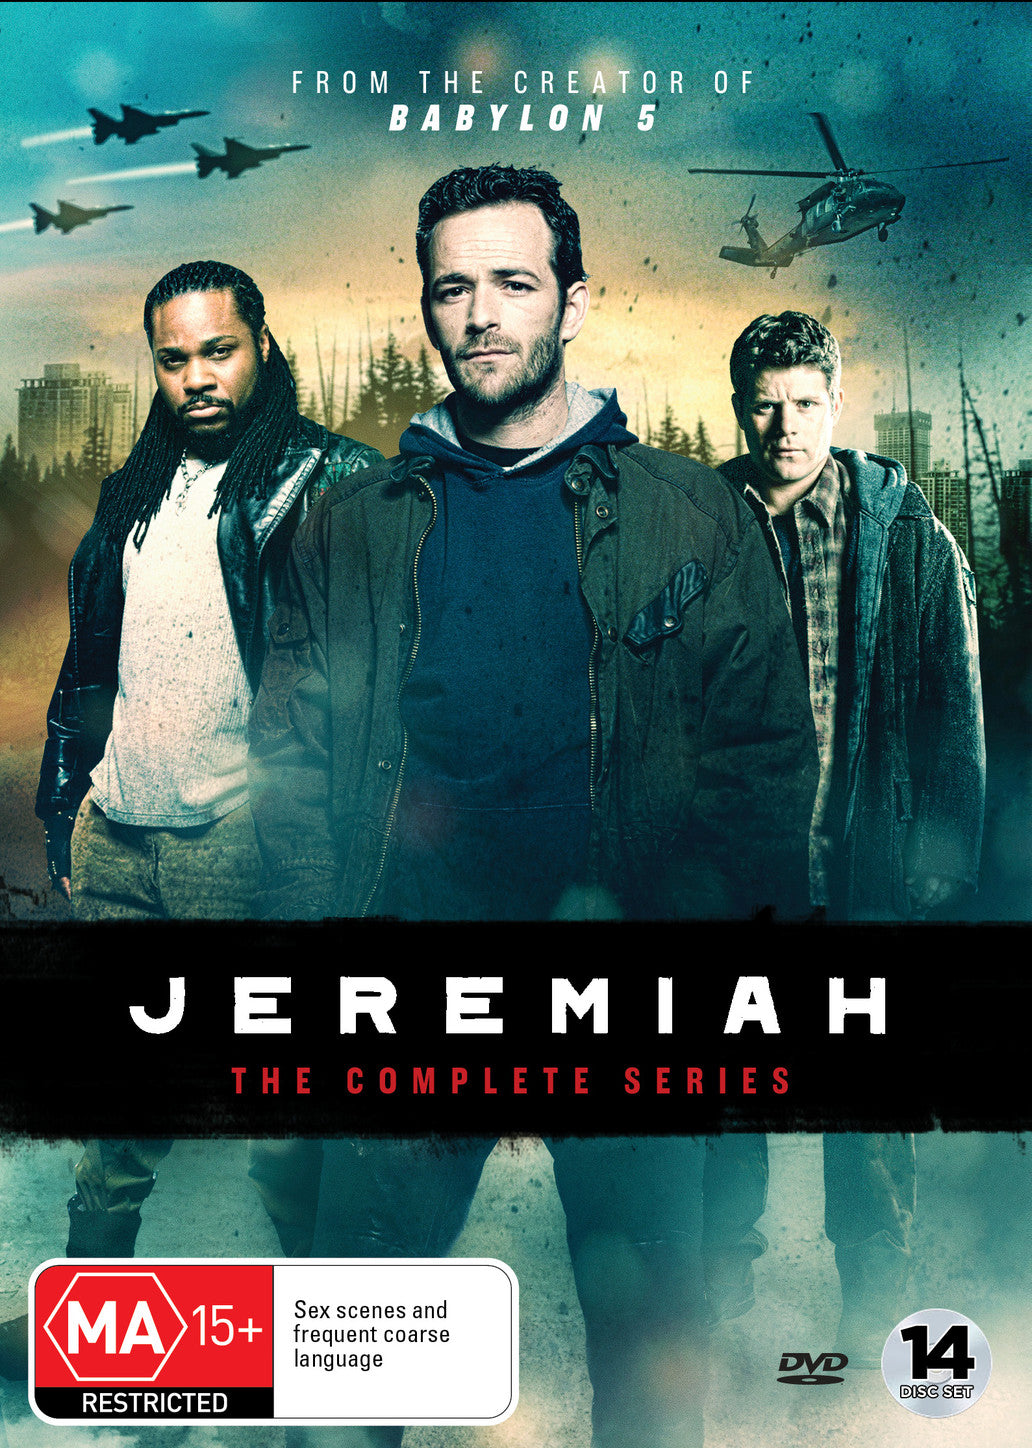 JEREMIAH THE COMPLETE SERIES